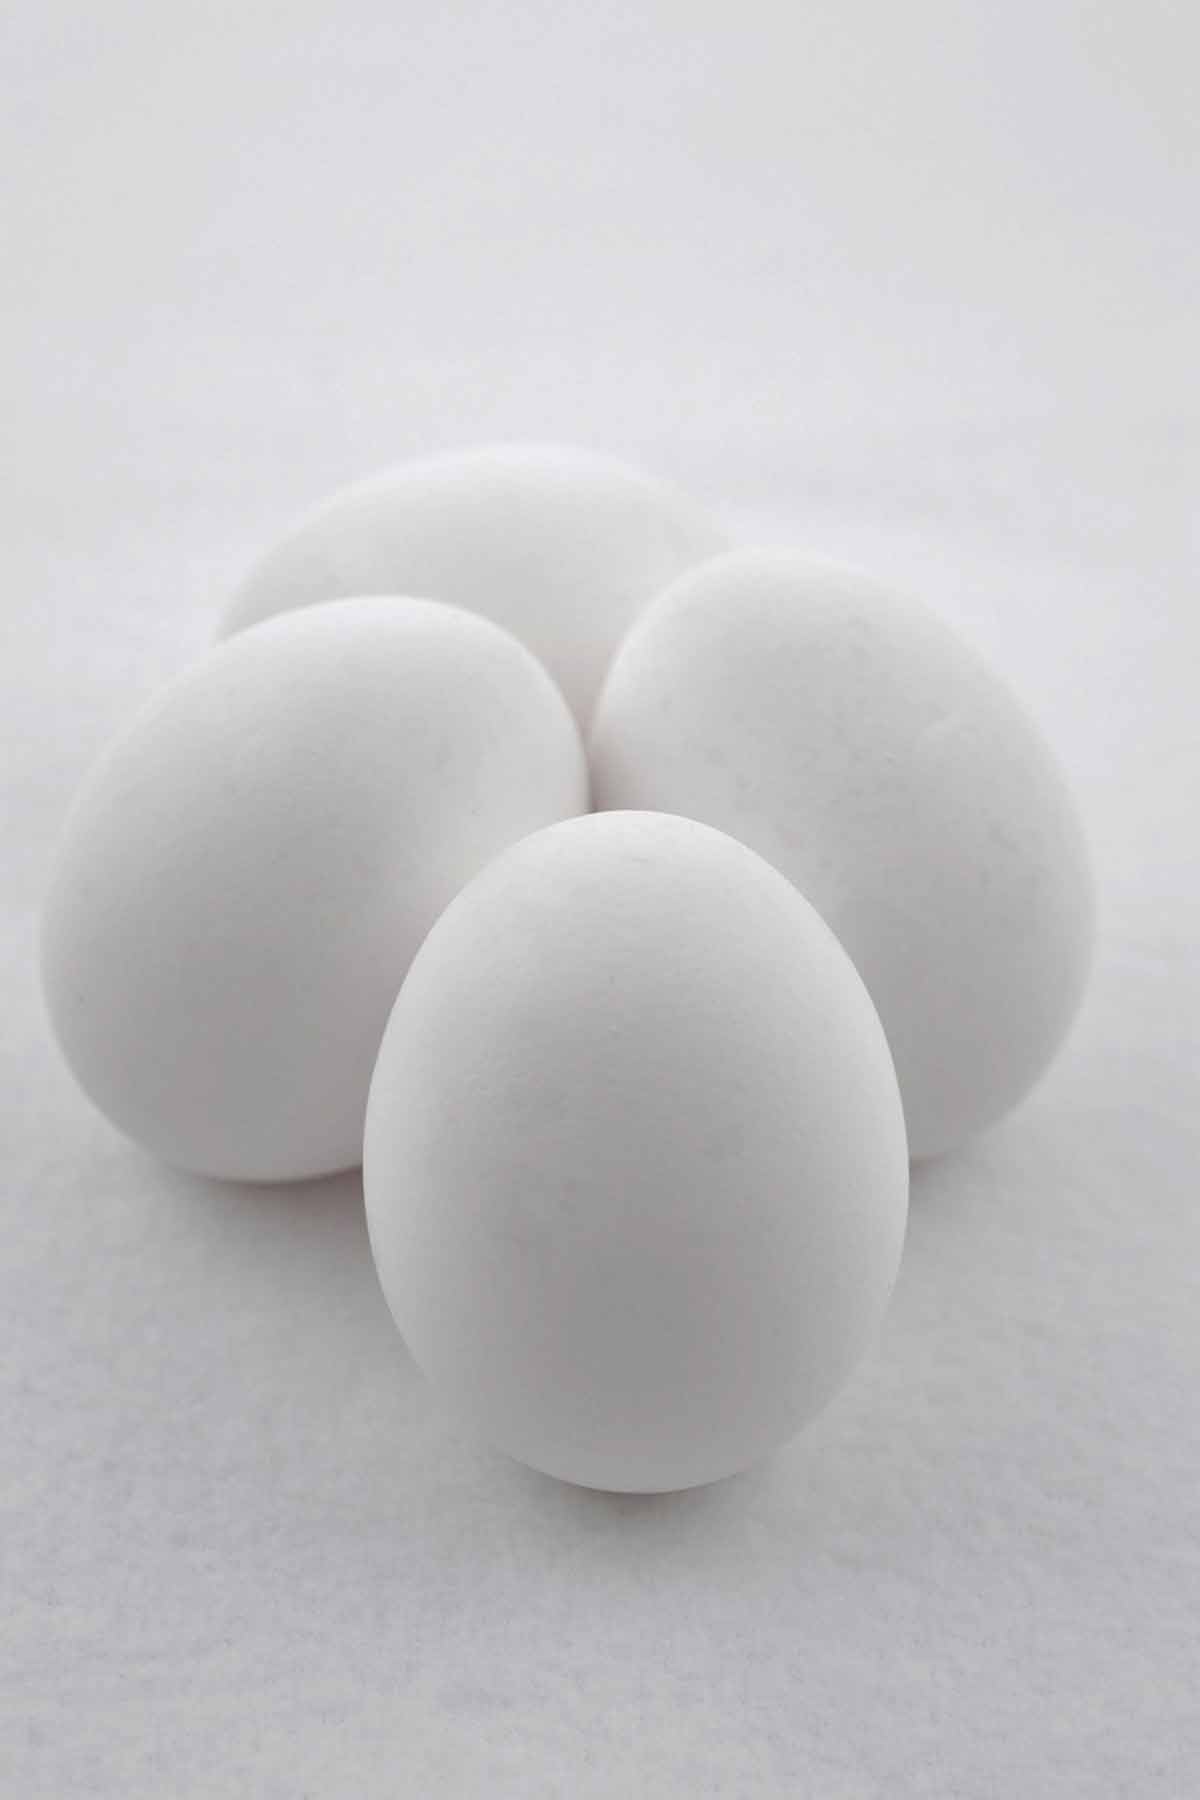 Four white eggs on the counter.